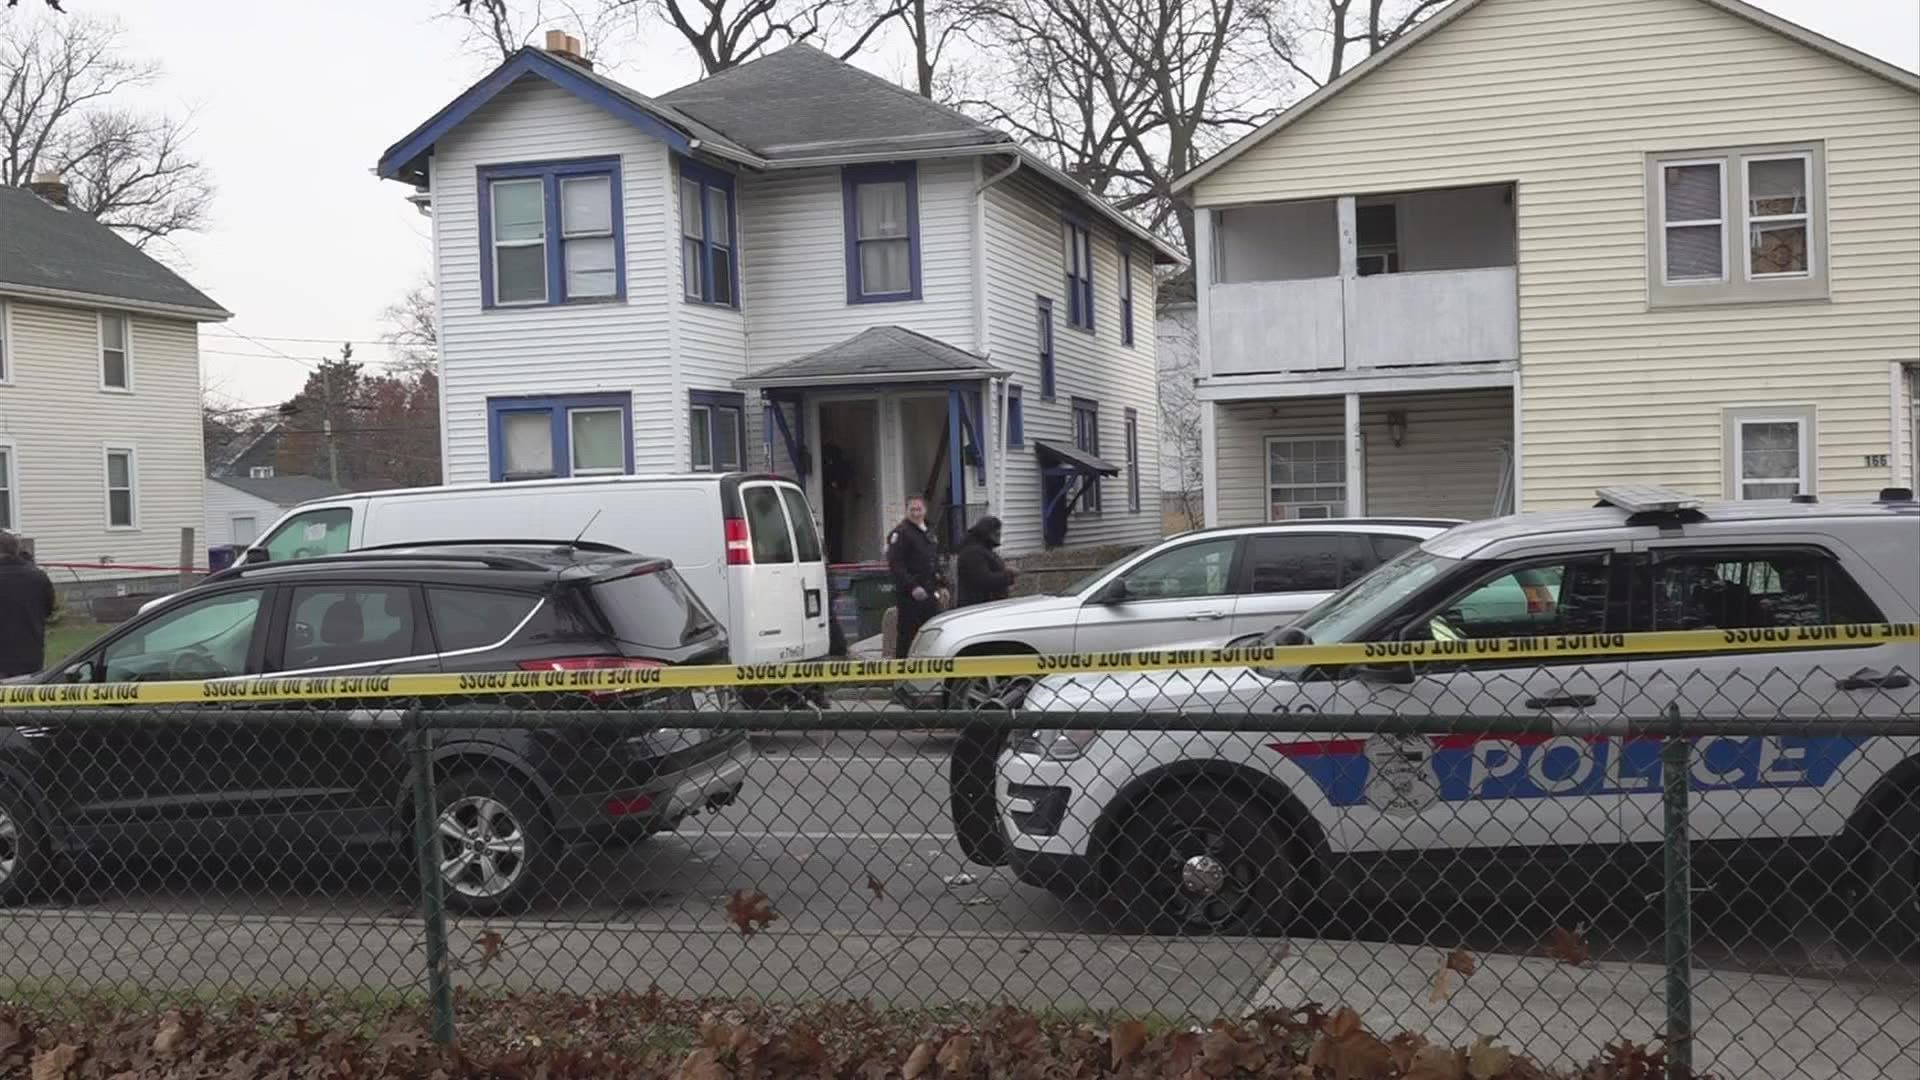 Columbus police responded to a report of the shooting shortly after 8 a.m. in the 100 block of Brehl Avenue.